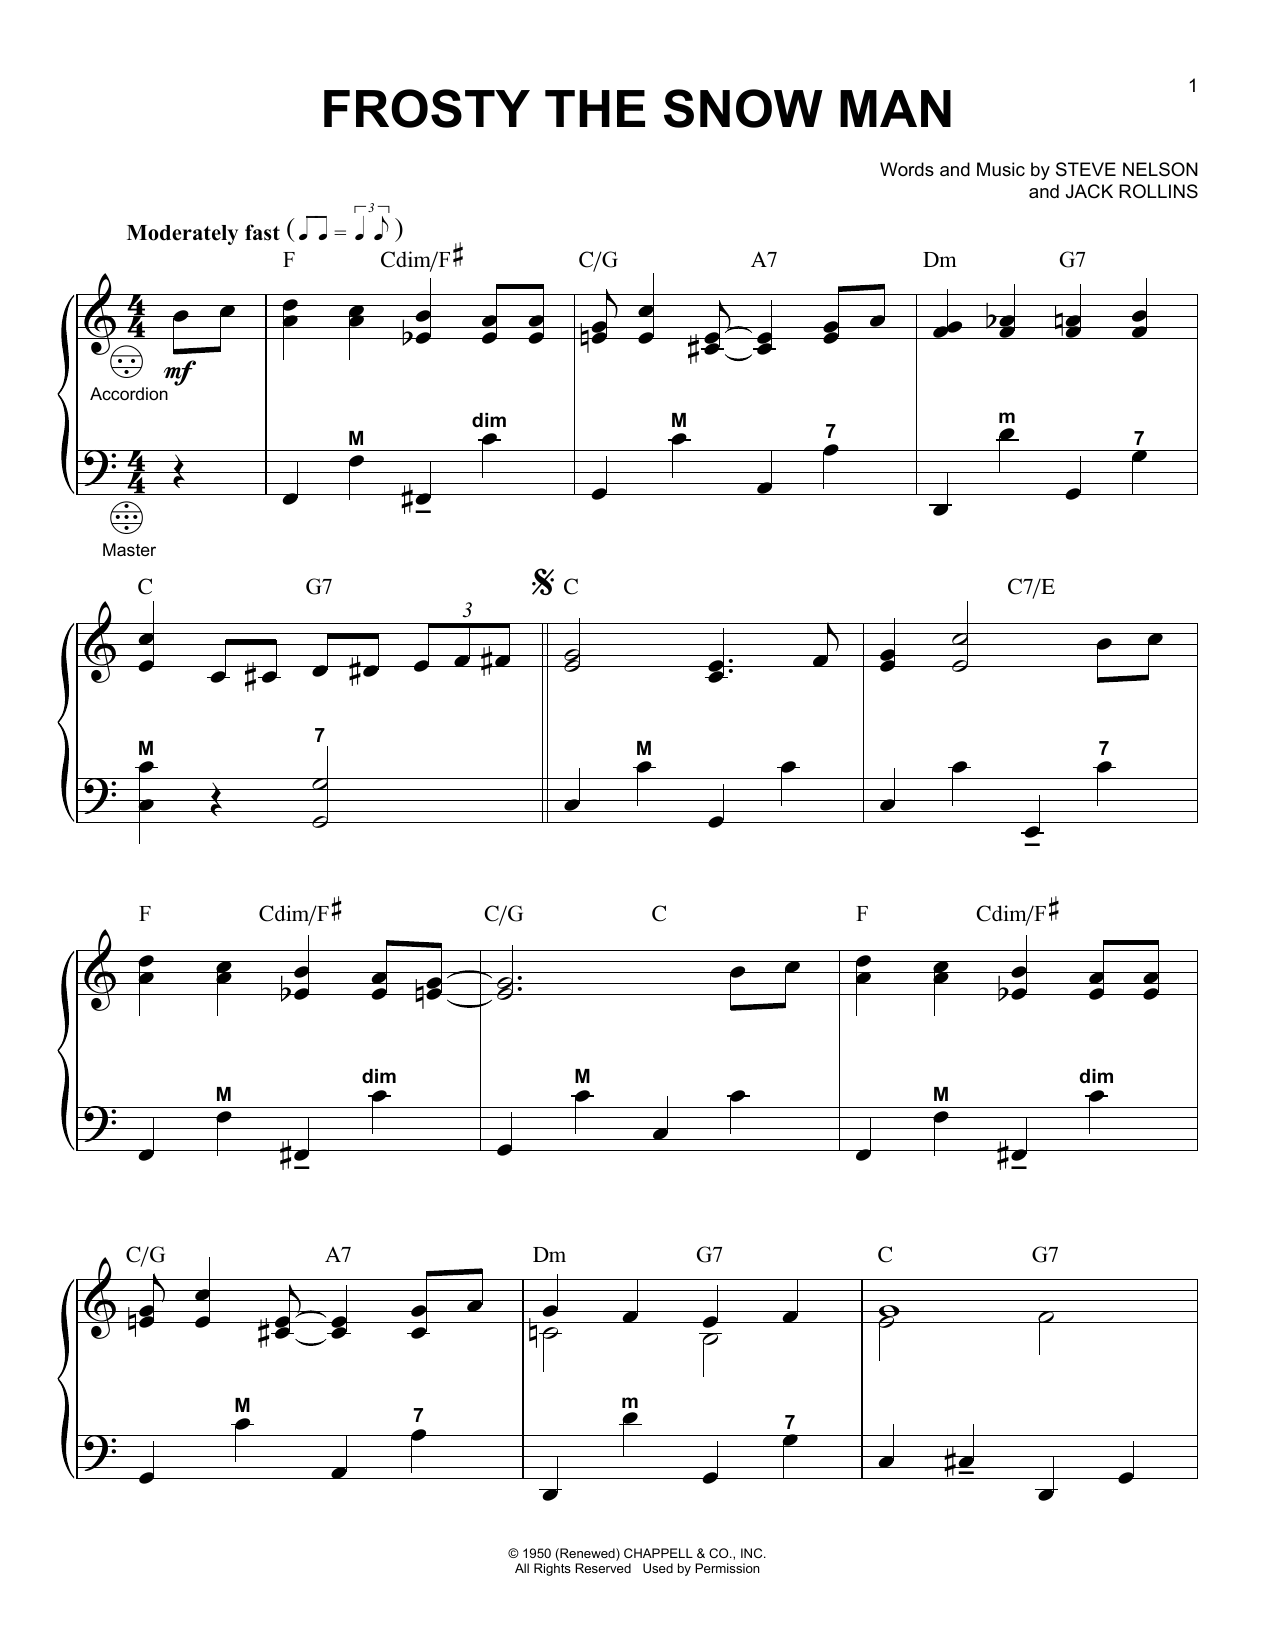 Steve Nelson Frosty The Snow Man sheet music notes and chords. Download Printable PDF.